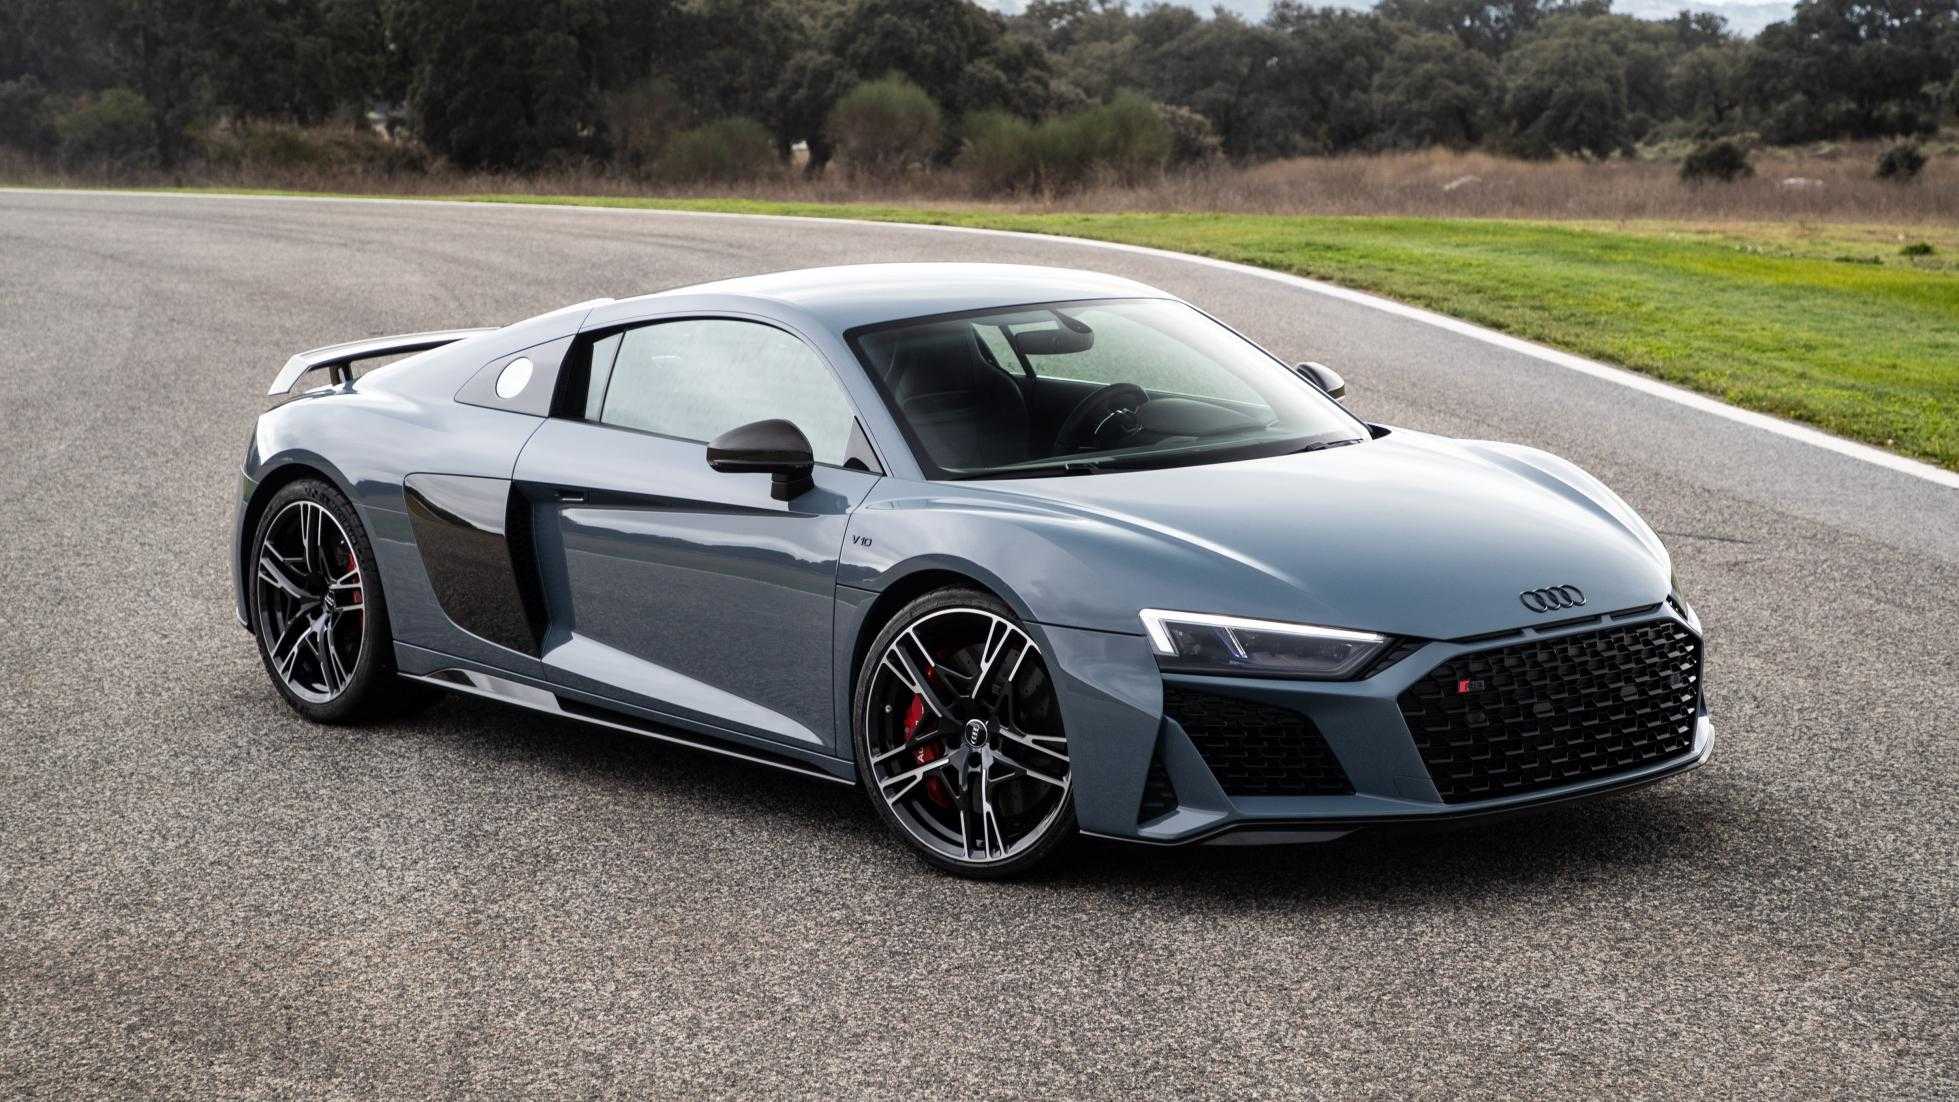 NextGen Audi R8 Might Debut As Early As 2023